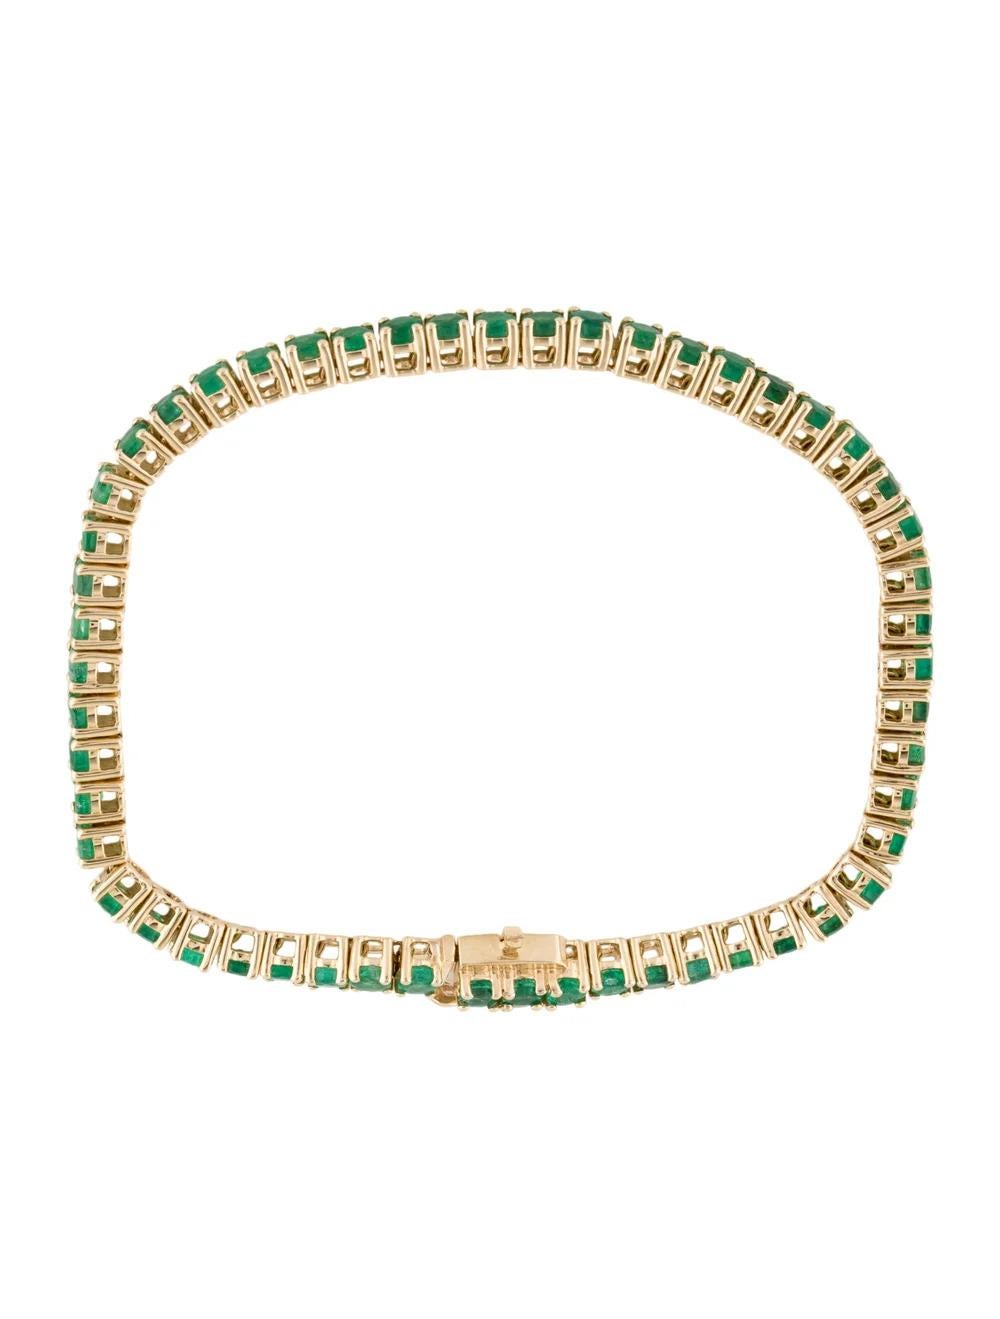 Vintage 14K Emerald Link Bracelet - 5.10ctw, Green Gemstone, Period Jewelry In New Condition For Sale In Holtsville, NY